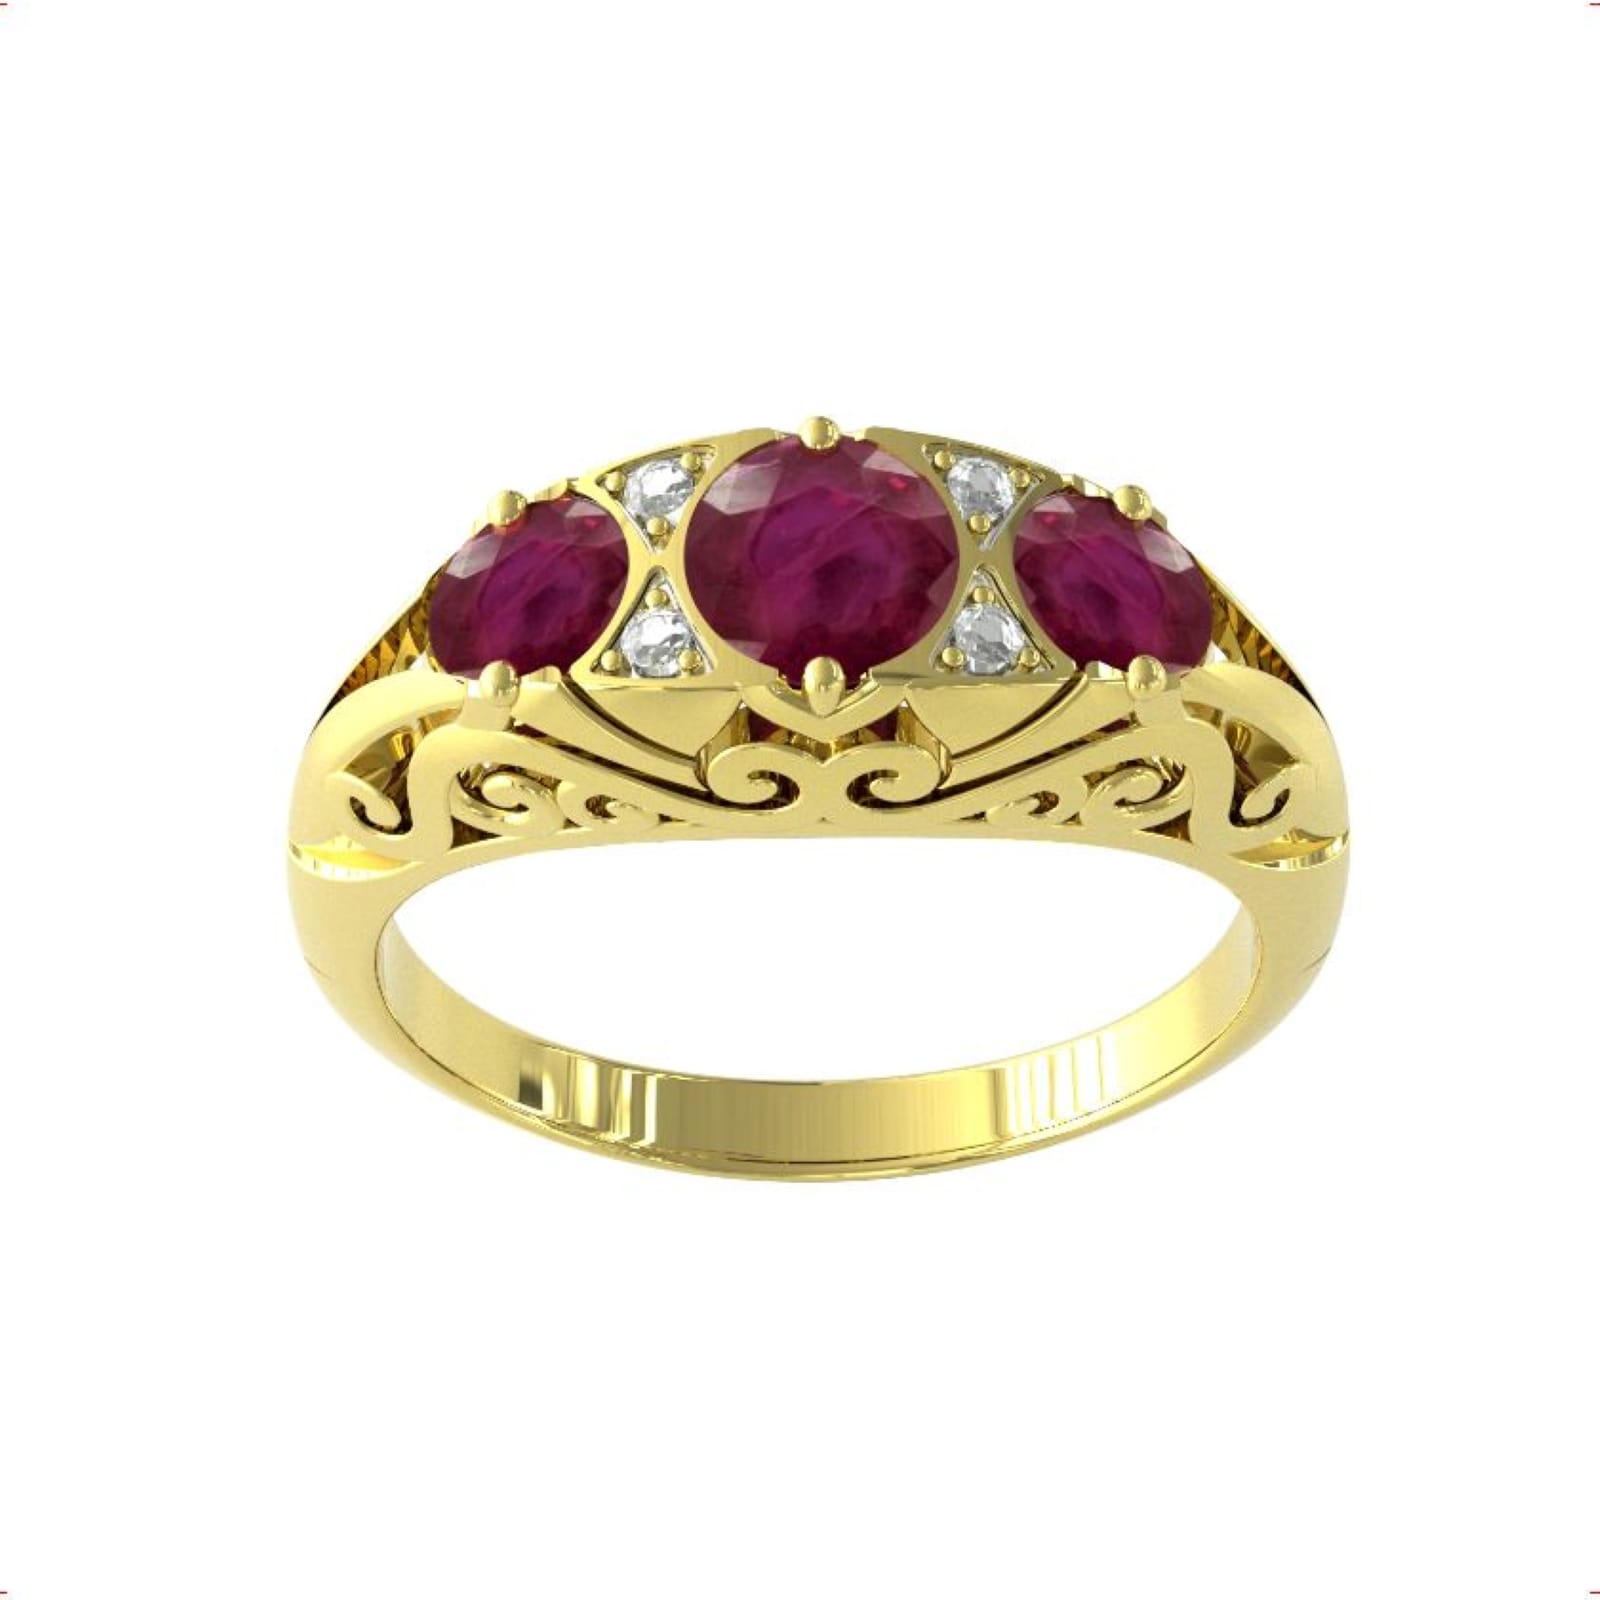 9ct Yellow Gold Victorian Style 3 Stone Ruby & Diamond Ring - Ring Size C.5